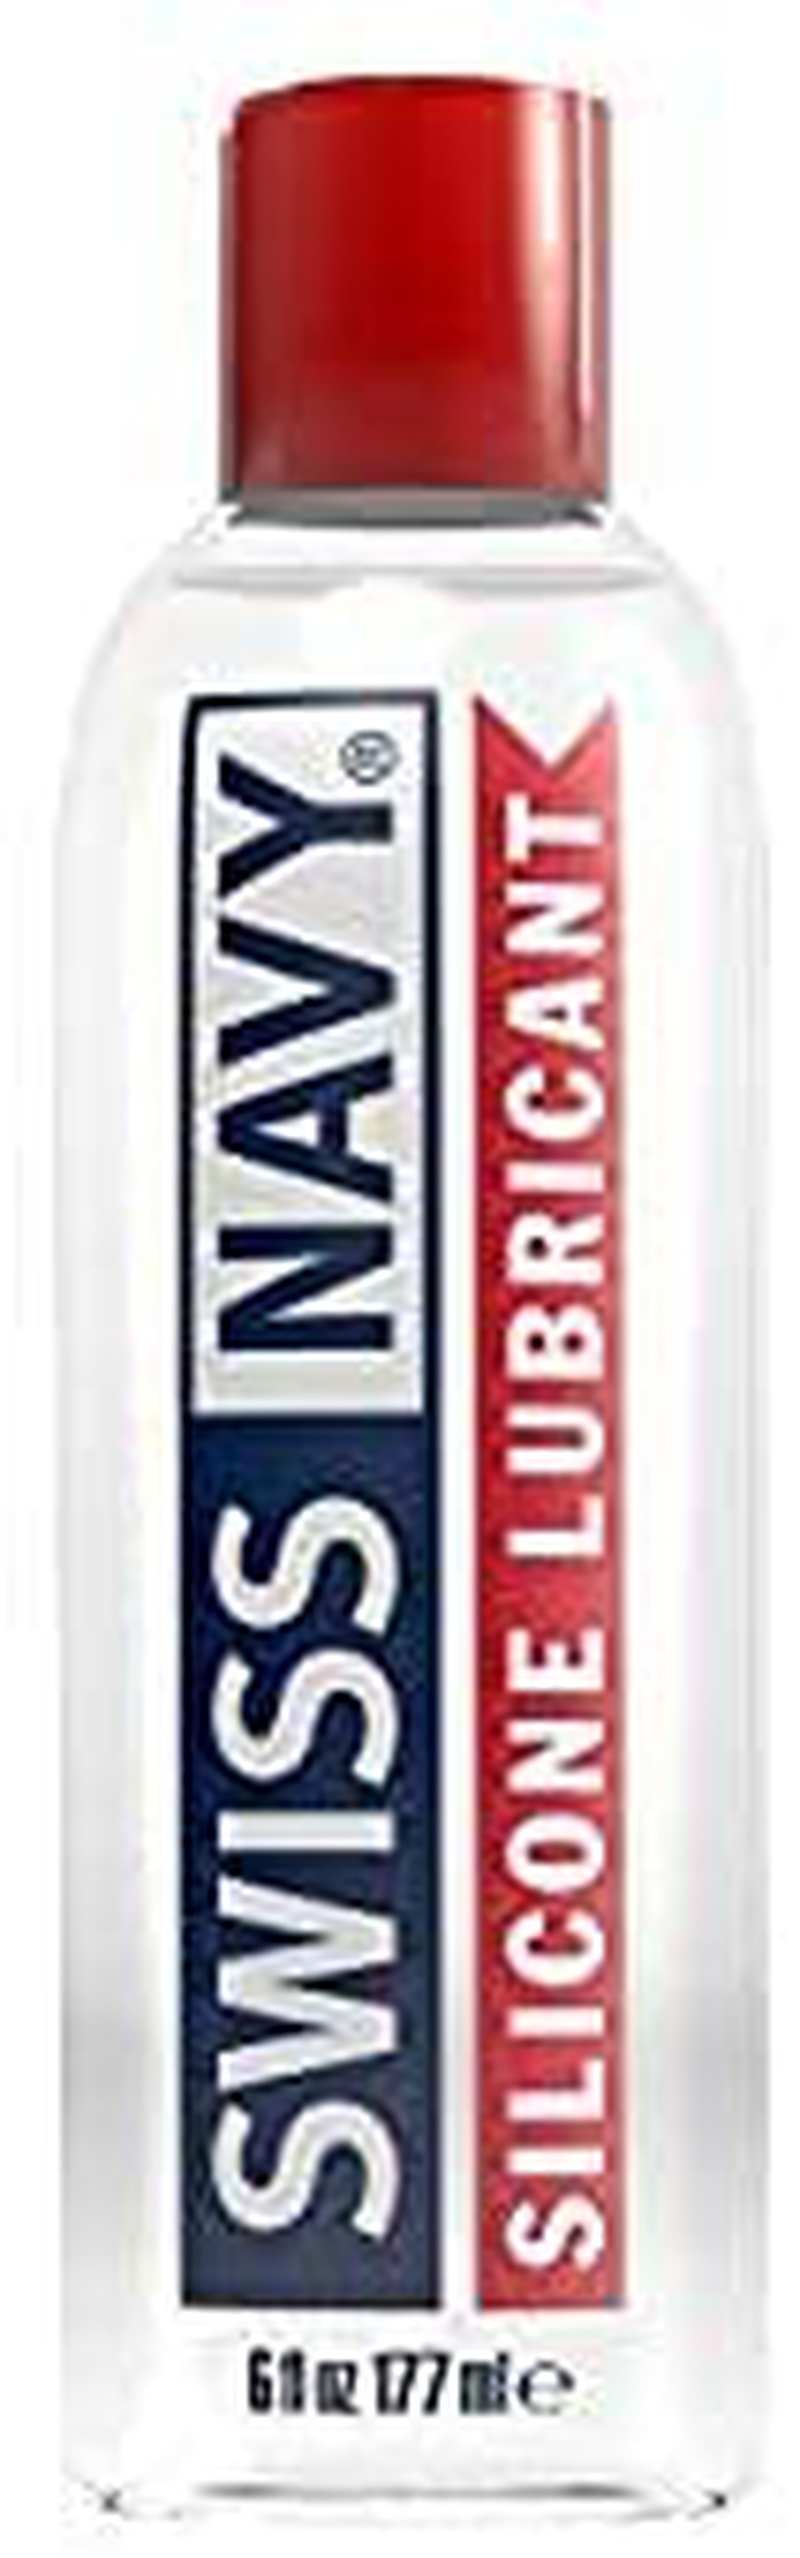 SWISS NAVY Premium Silicone Sex Lubricant Lube for Men, Women & Couples. MD Science Lab